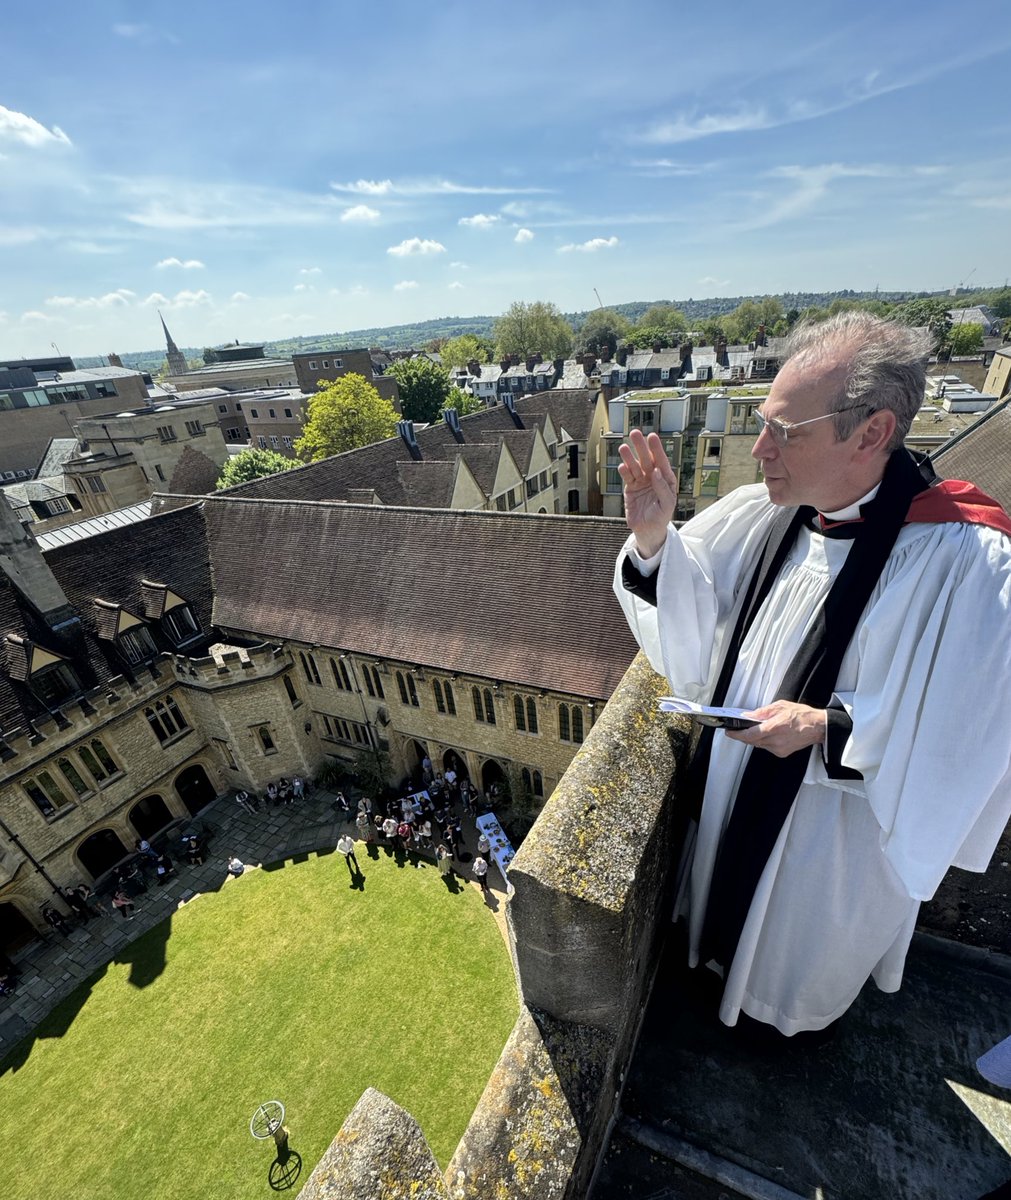 Happy Ascension Day! Herewith, the Principal blessing the assembled congregation from the tower earlier this afternoon. Do join us at 6.30pm for High Mass in the Chapel. The choir will sing music by Langlais and Shephard. Supper will follow. All are most welcome!